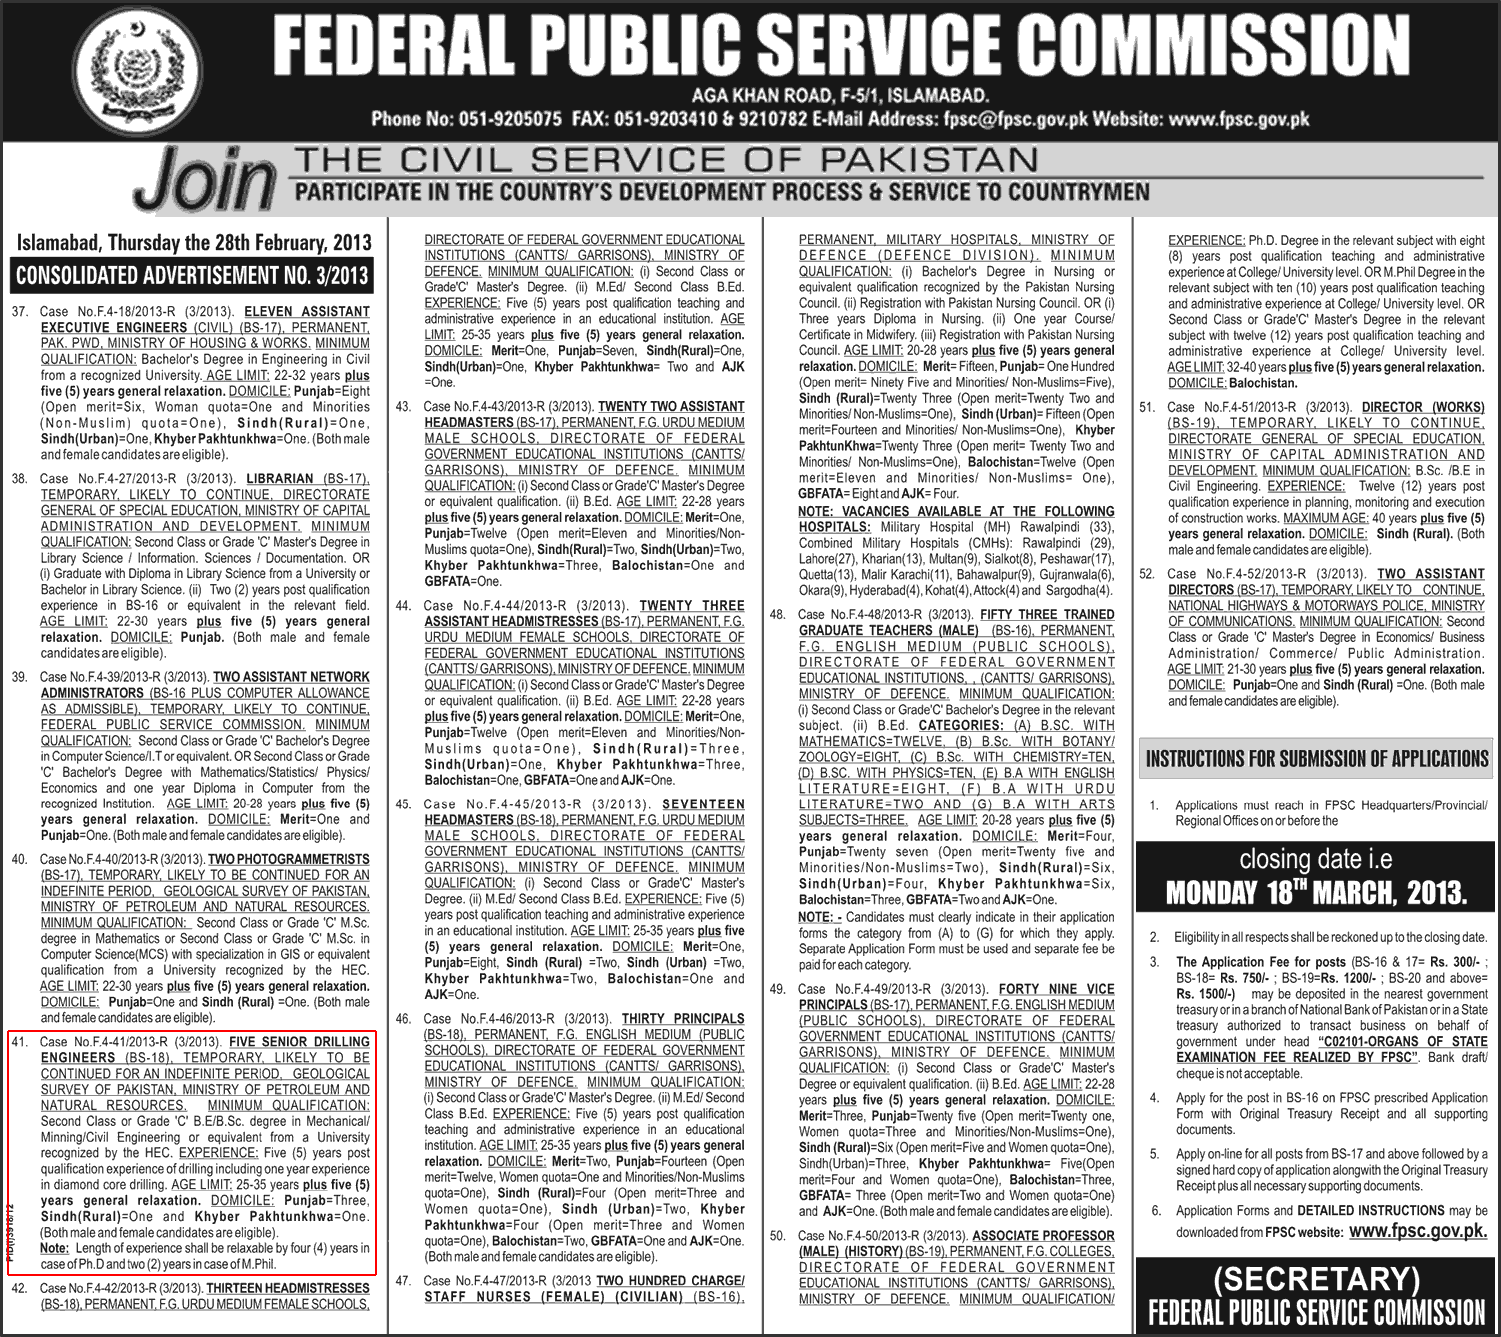 Senior Drilling Engineer Jobs by FPSC in Geological Survey of Pakistan 03-March-2013 Ad Latest